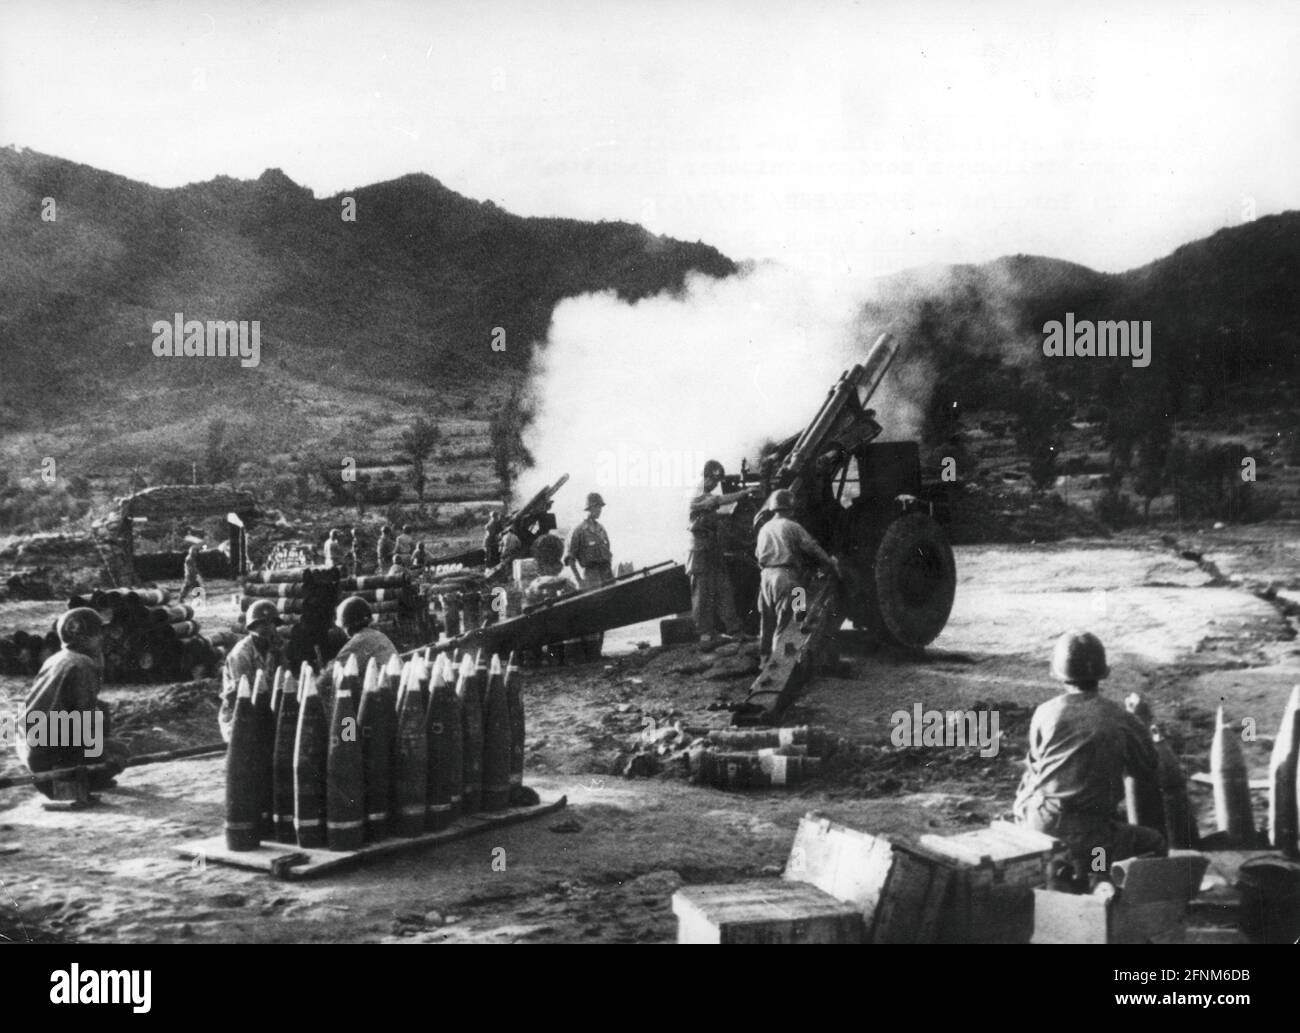 events, Korean War 1950 - 1953, ADDITIONAL-RIGHTS-CLEARANCE-INFO-NOT-AVAILABLE Stock Photo